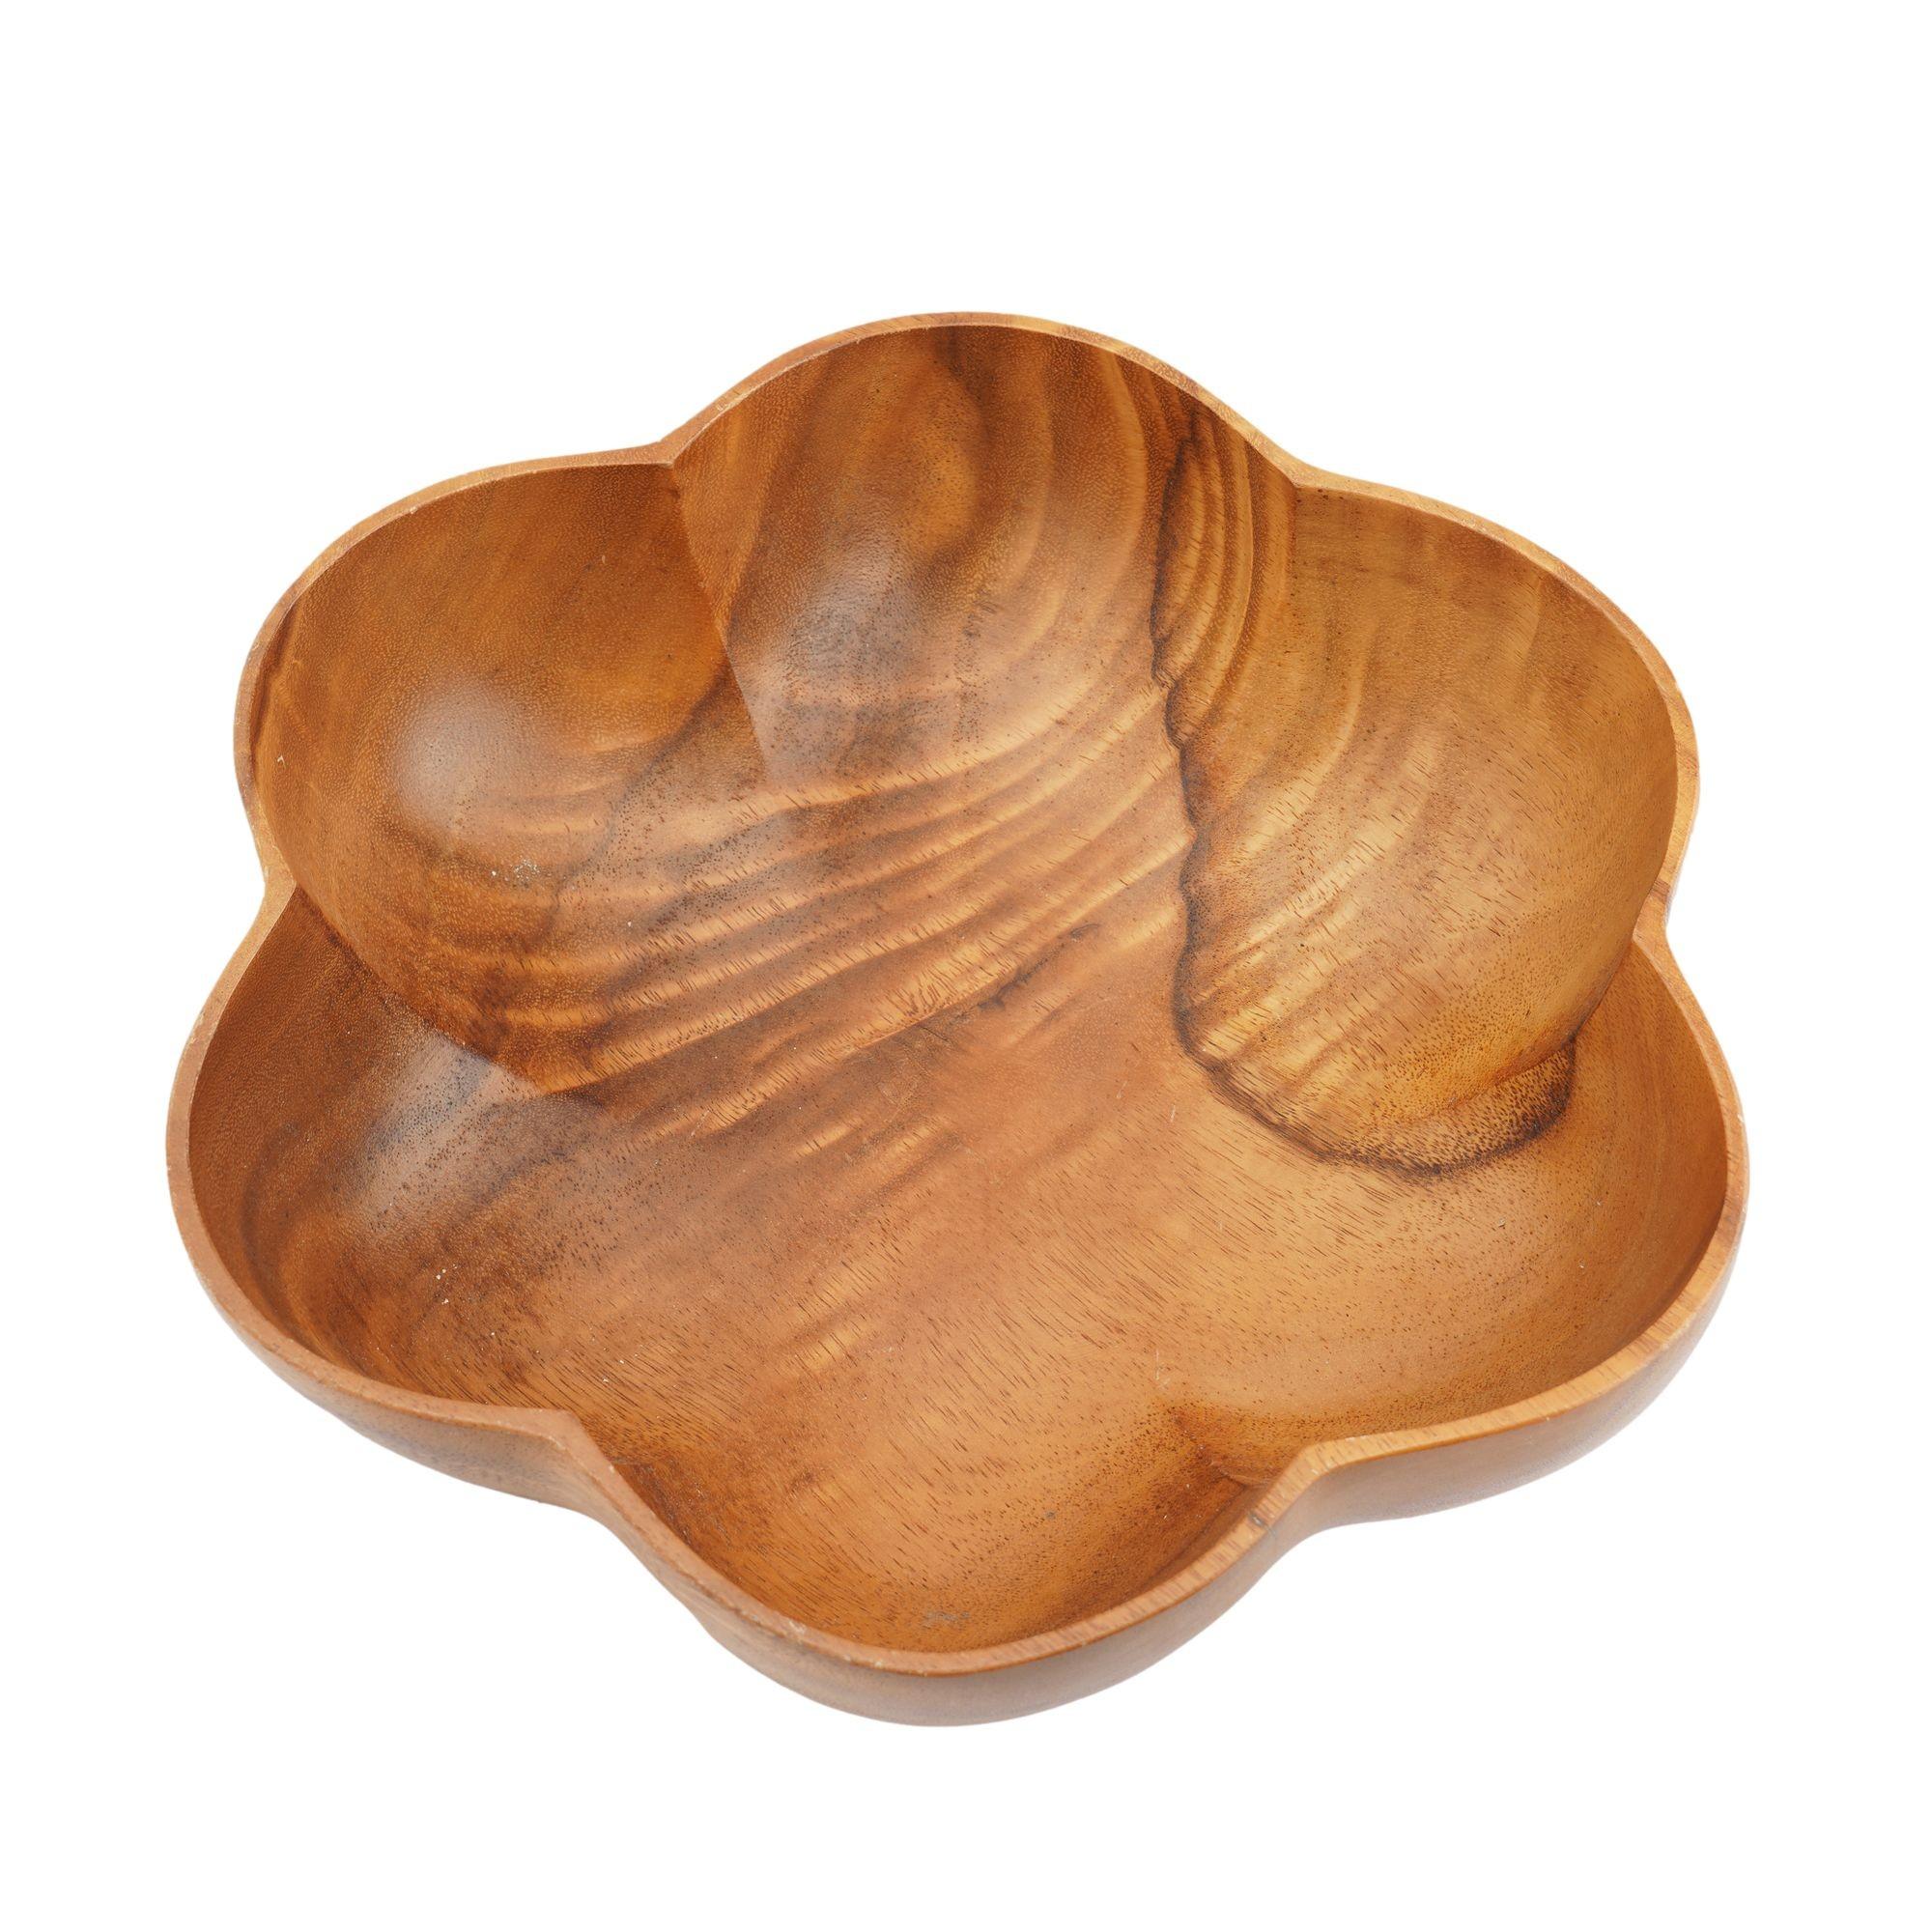 Turned and hand carved five lobe bowl from a single piece of figured monkey pod wood.

Hawaii, circa 1950.